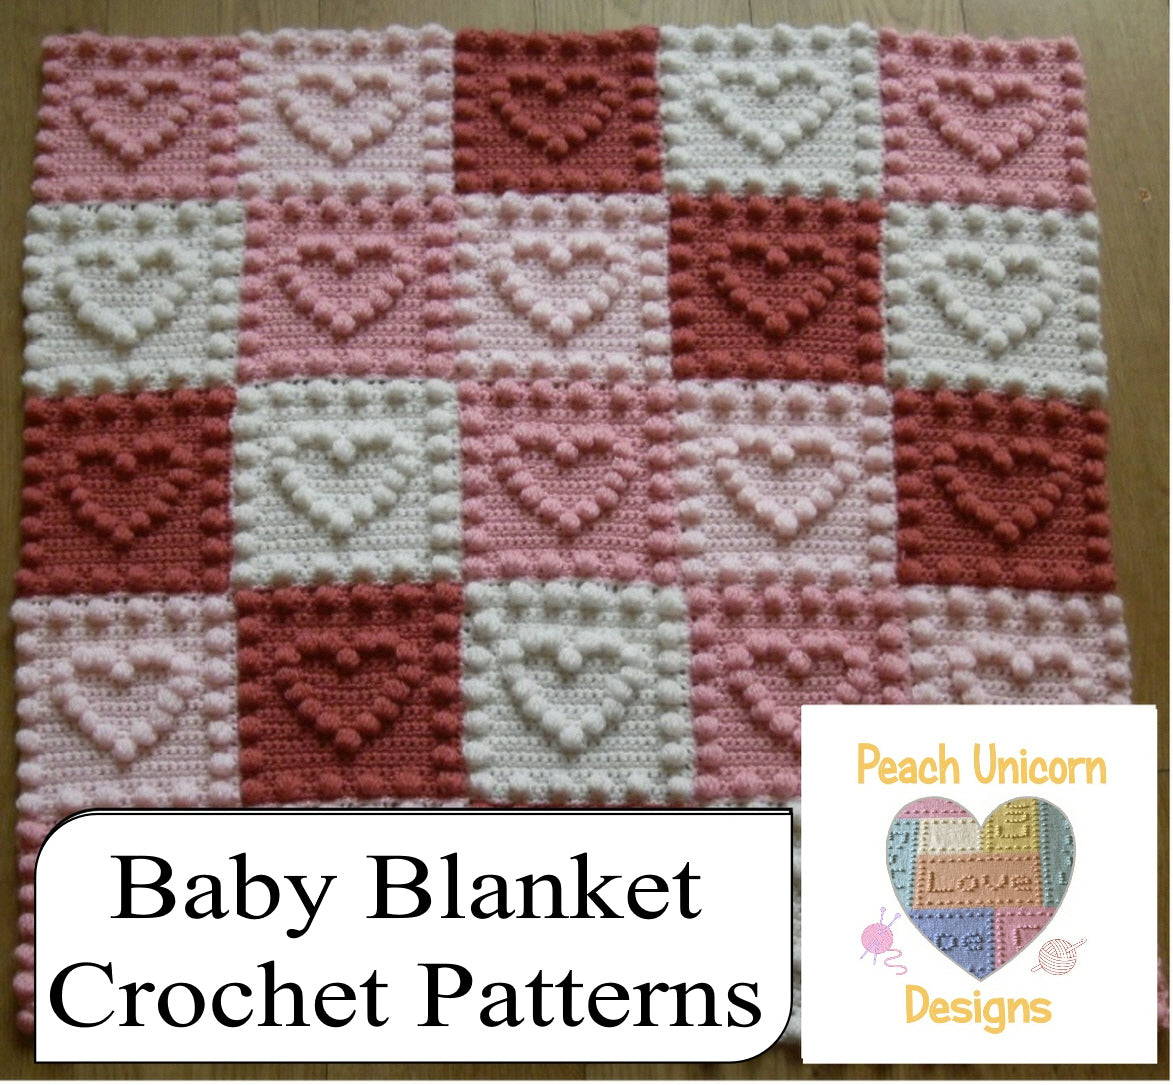 Red Heart Precious Knit Baby Blanket Pattern